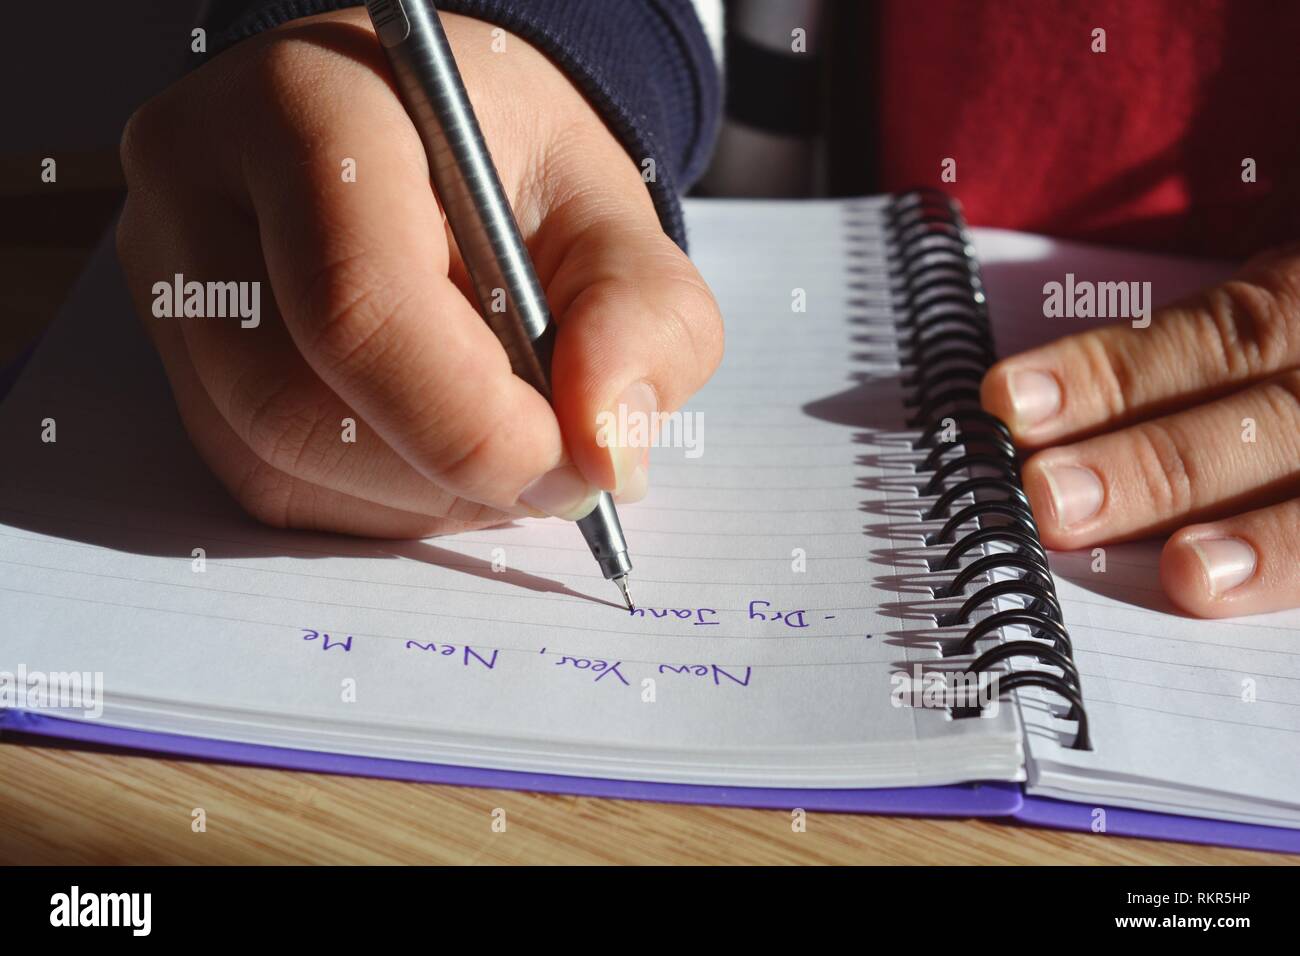 Young woman seated at a desk, writing a list of New Year resolutions in a spiral bound notebook, starting with Dry January. Midsection, close-up hand Stock Photo